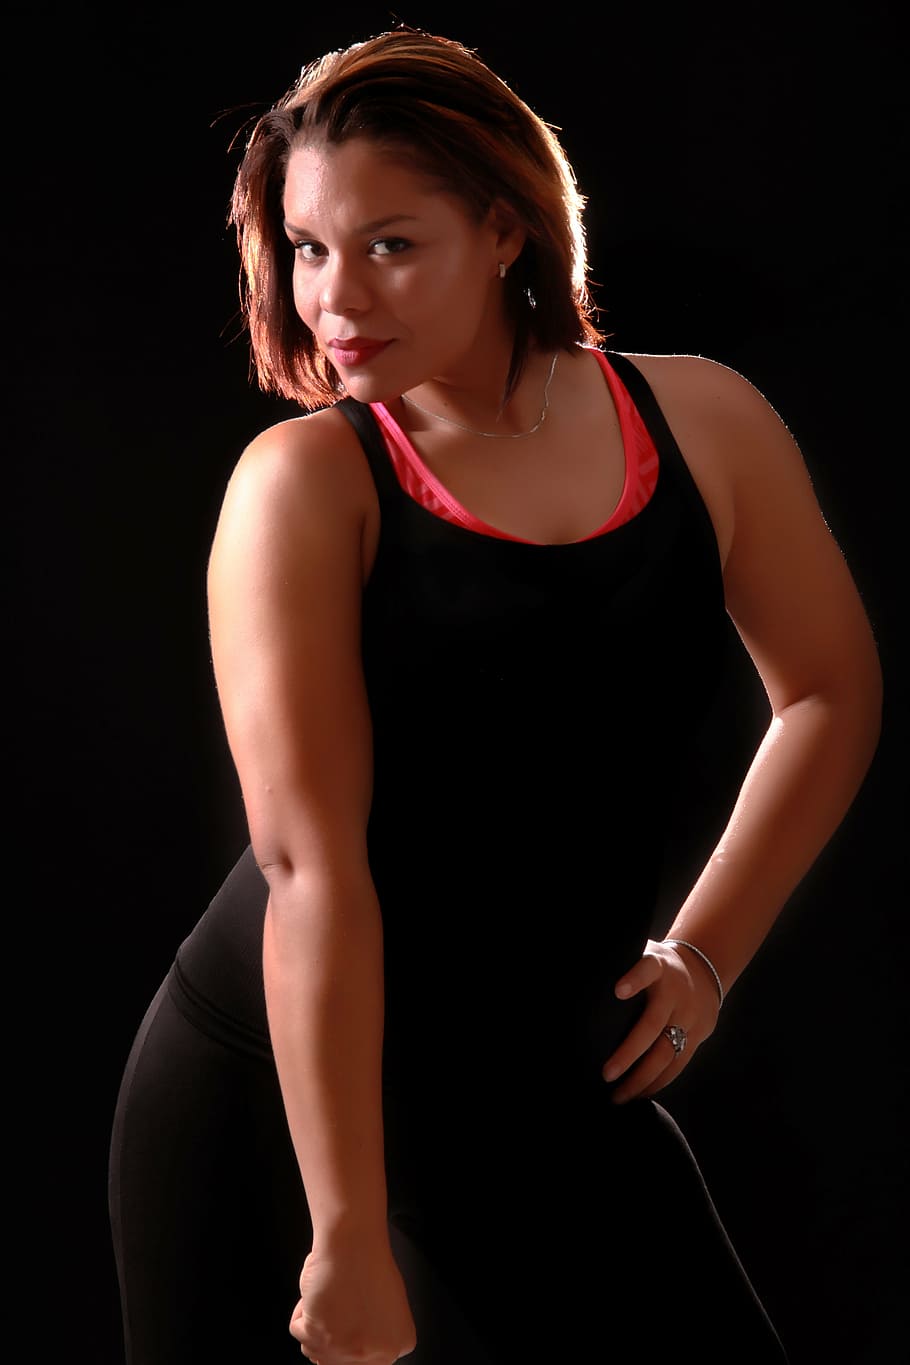 close-up photography, woman, black, tank, top, gym, beauty, athlete, figure, dominican republic